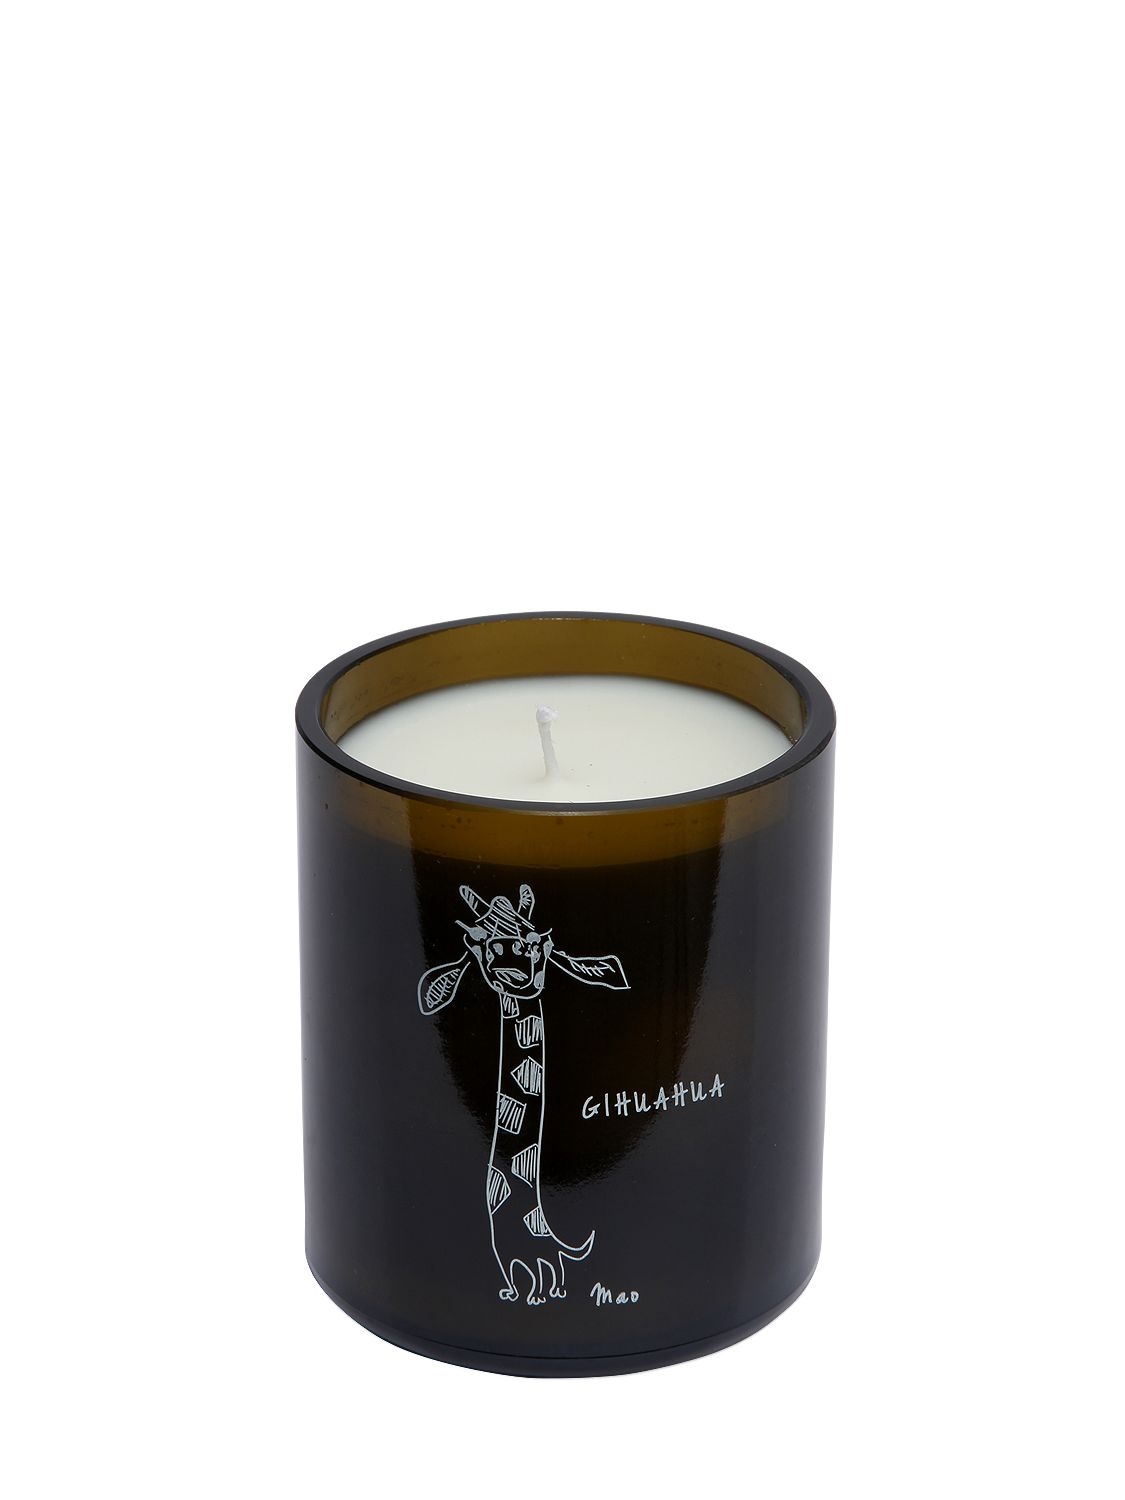 Maison Bereto Gihuahua - Scented Candle For Lvr In Black,white